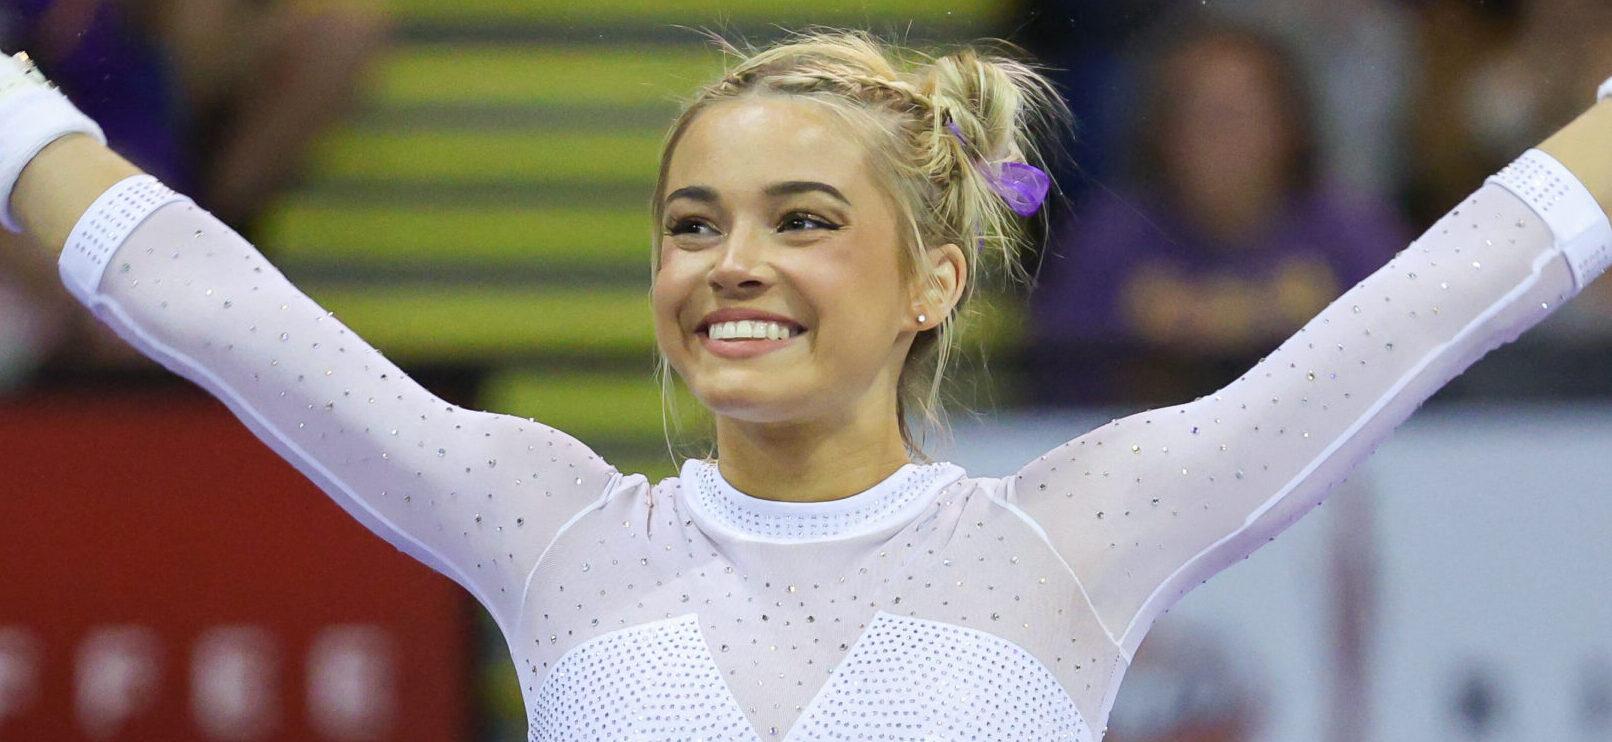 Olivia Dunne Gives A Cheeky View In Her LSU Leotard For ‘Senior Night’